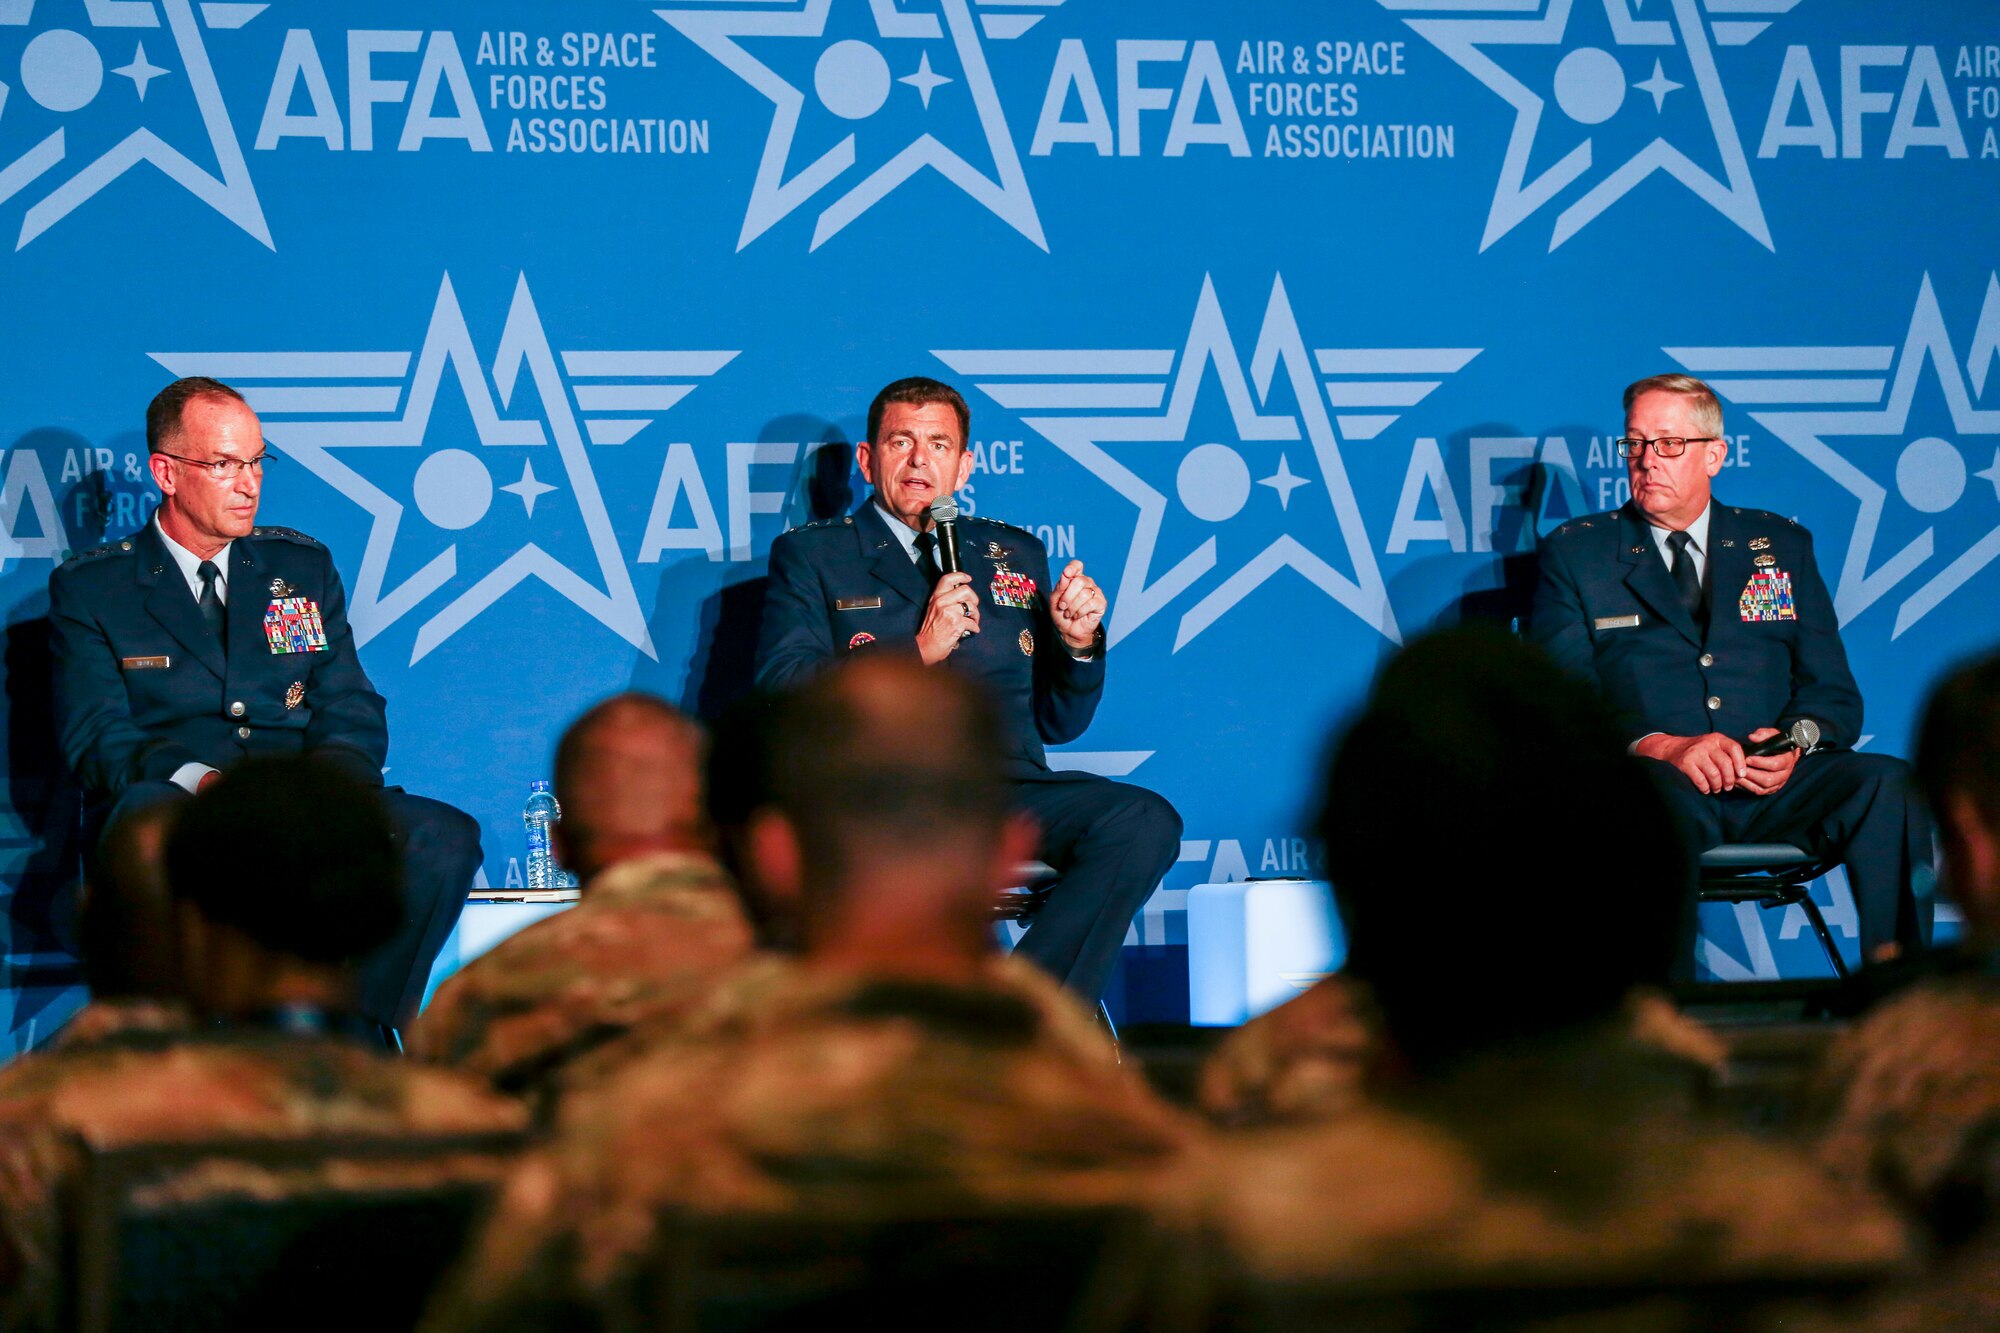 Air Force Lt. Gen. Michael A. Loh, director, Air National Guard, center; Lt. Gen. John P. Healy, chief, Air Force Reserve, left and Maj. Gen. Daryl L. Bohac, Nebraska adjutant general, discuss the Air Force reserve component during a panel at the 2022 Air and Space Forces Association's Air, Space and Cyber Conference in National Harbor, Maryland, Sept. 19, 2022. (U.S. Army National Guard photo by Sgt. 1st Class Zach Sheely)